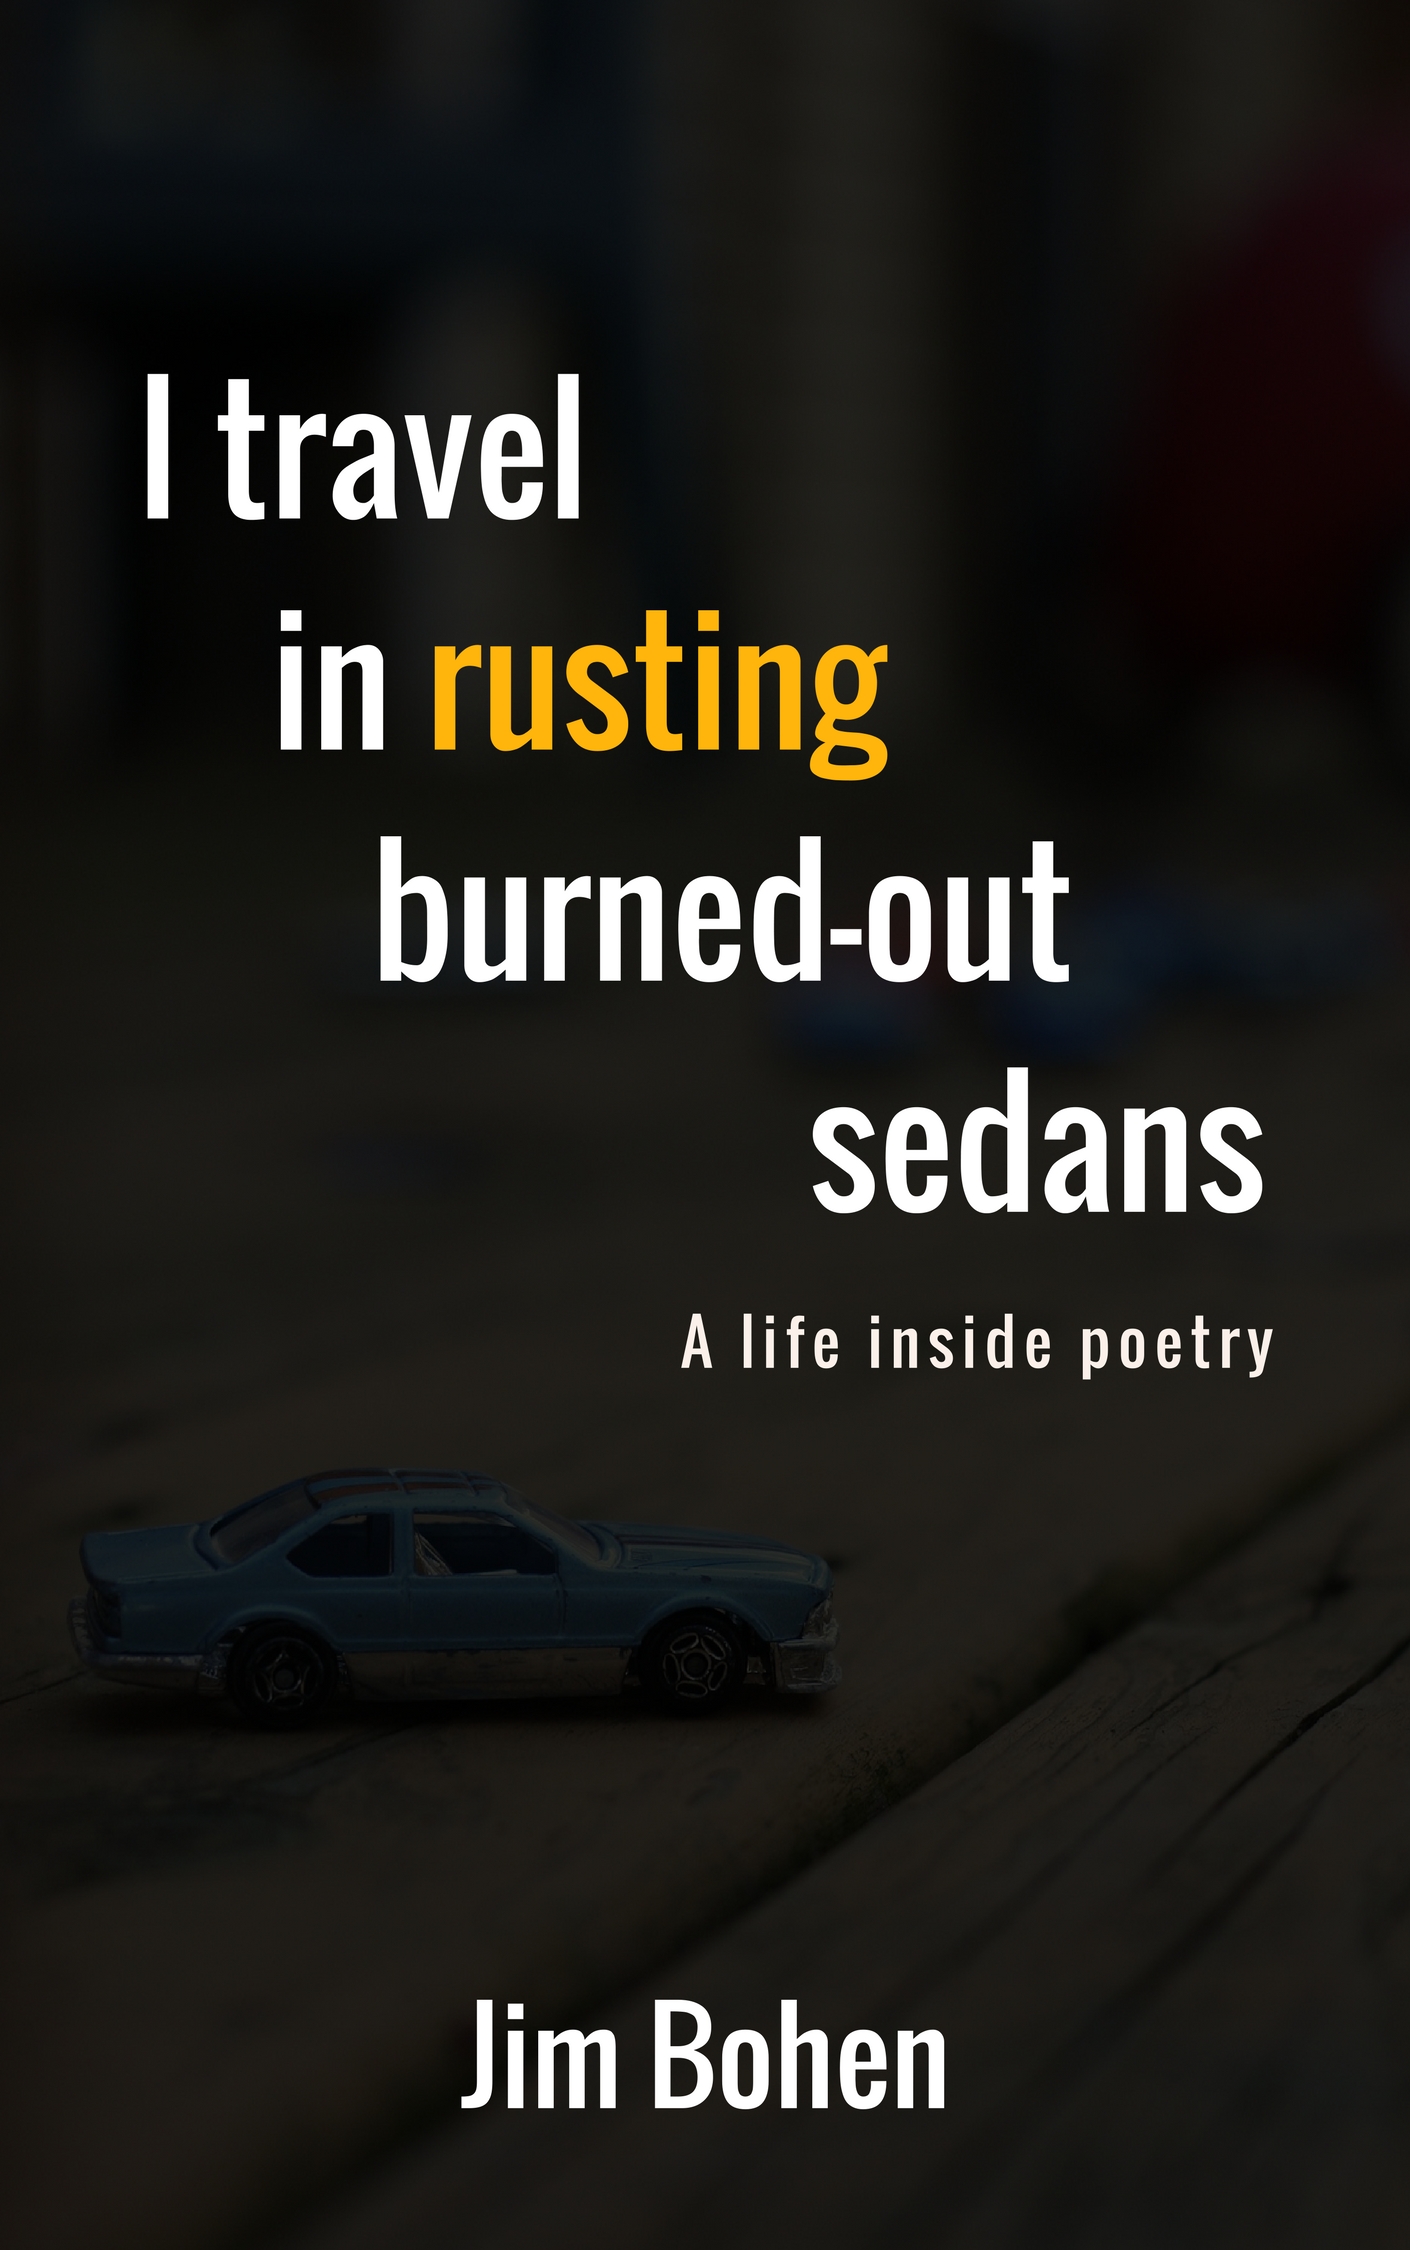 the cover of Jim Bohen's book, "I travel in rusting burned out sedans: A life inside poetry" 